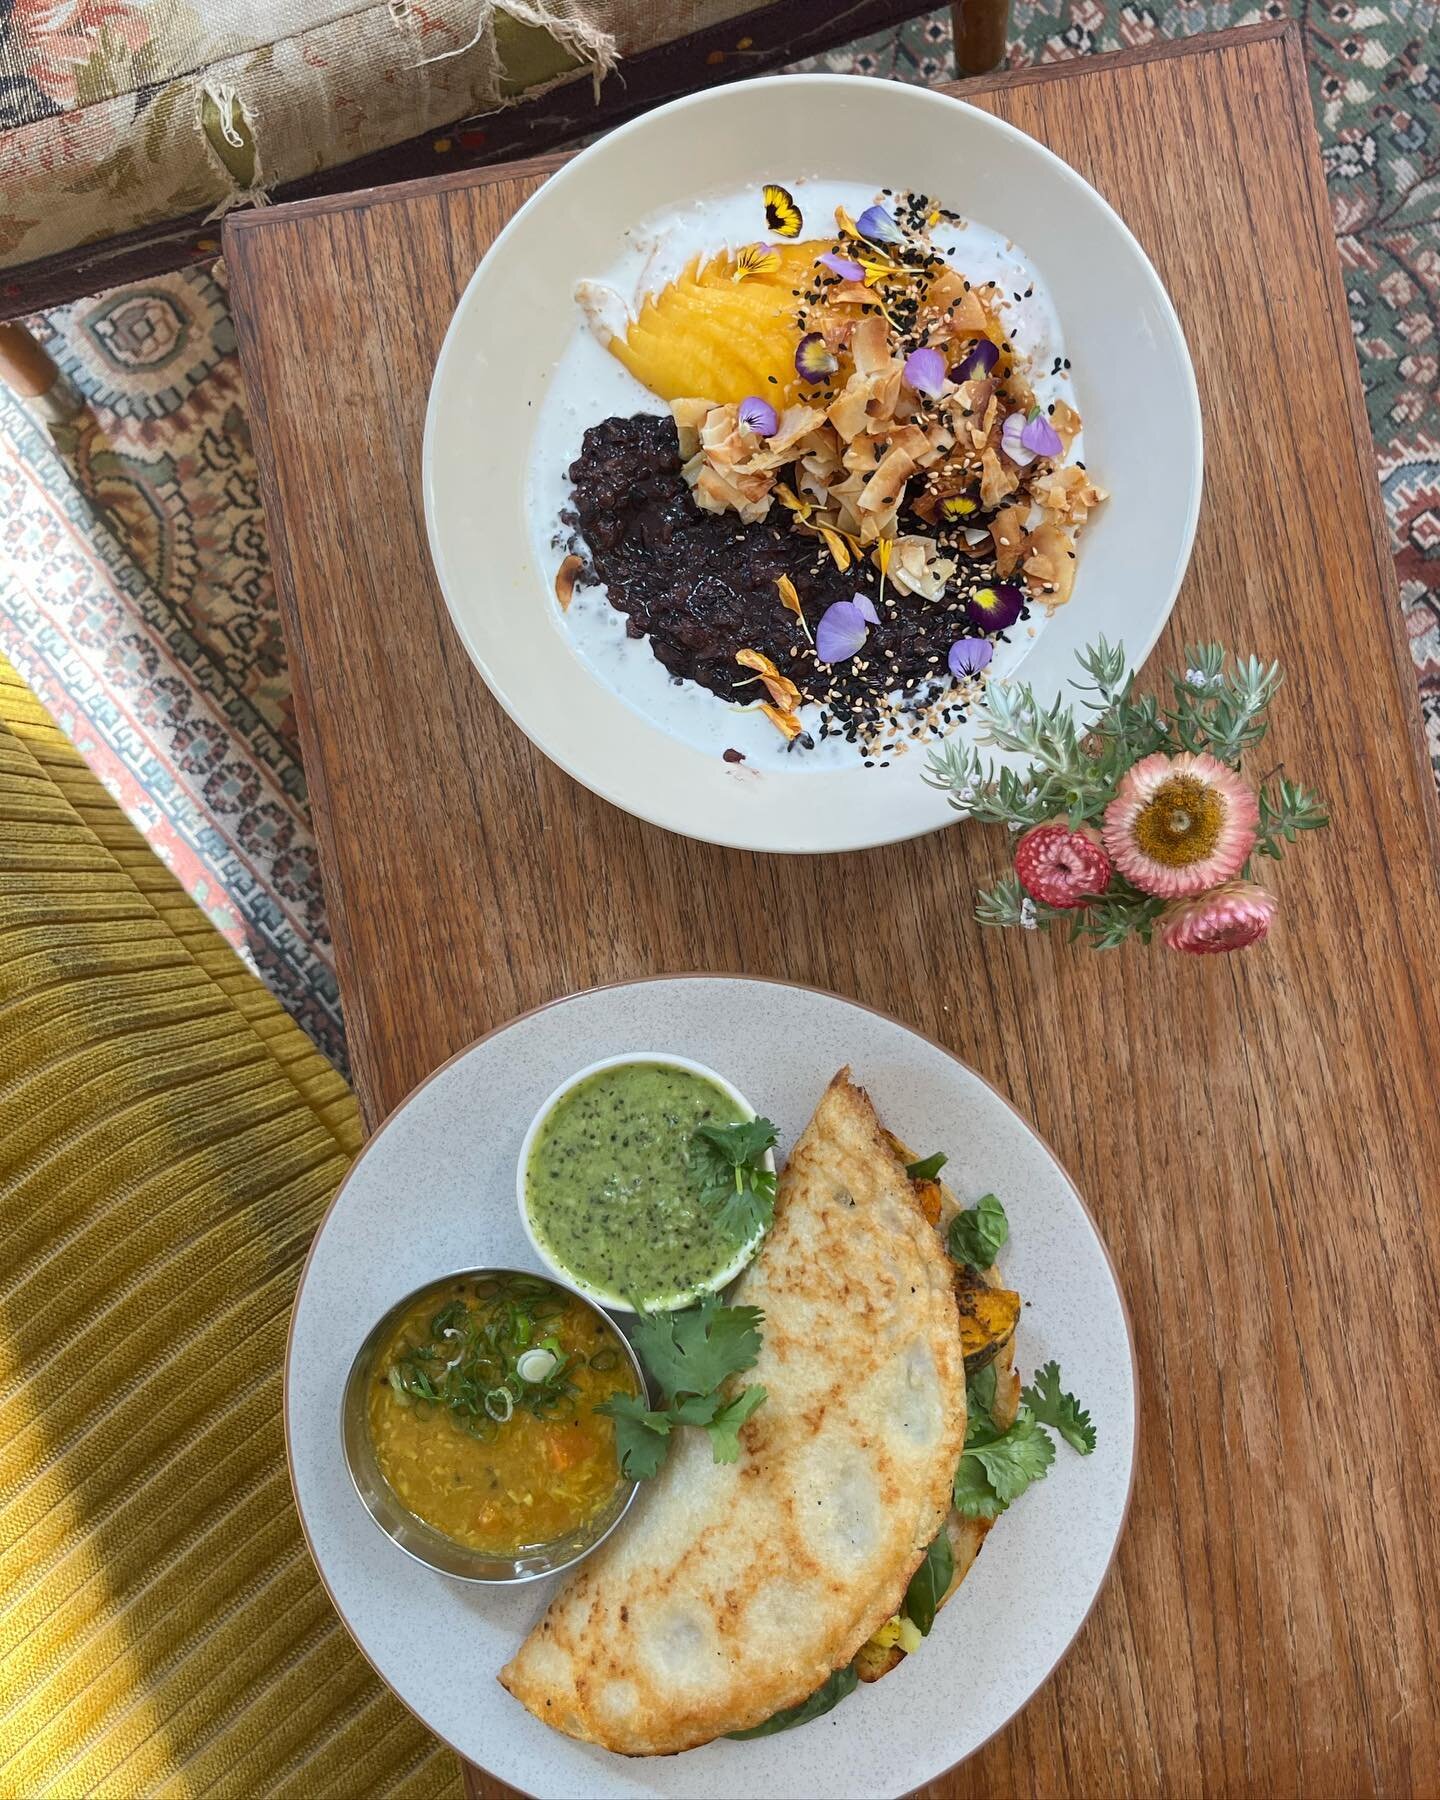 New specials this week : 

&bull; Masala dosa : South Indian fermented rice and lentil crepe filled with spiced pumpkin and potato, coriander green chilli coconut chutney, sambar 

&bull; Steamed black sticky rice, lime leaf infused coconut cream, fr